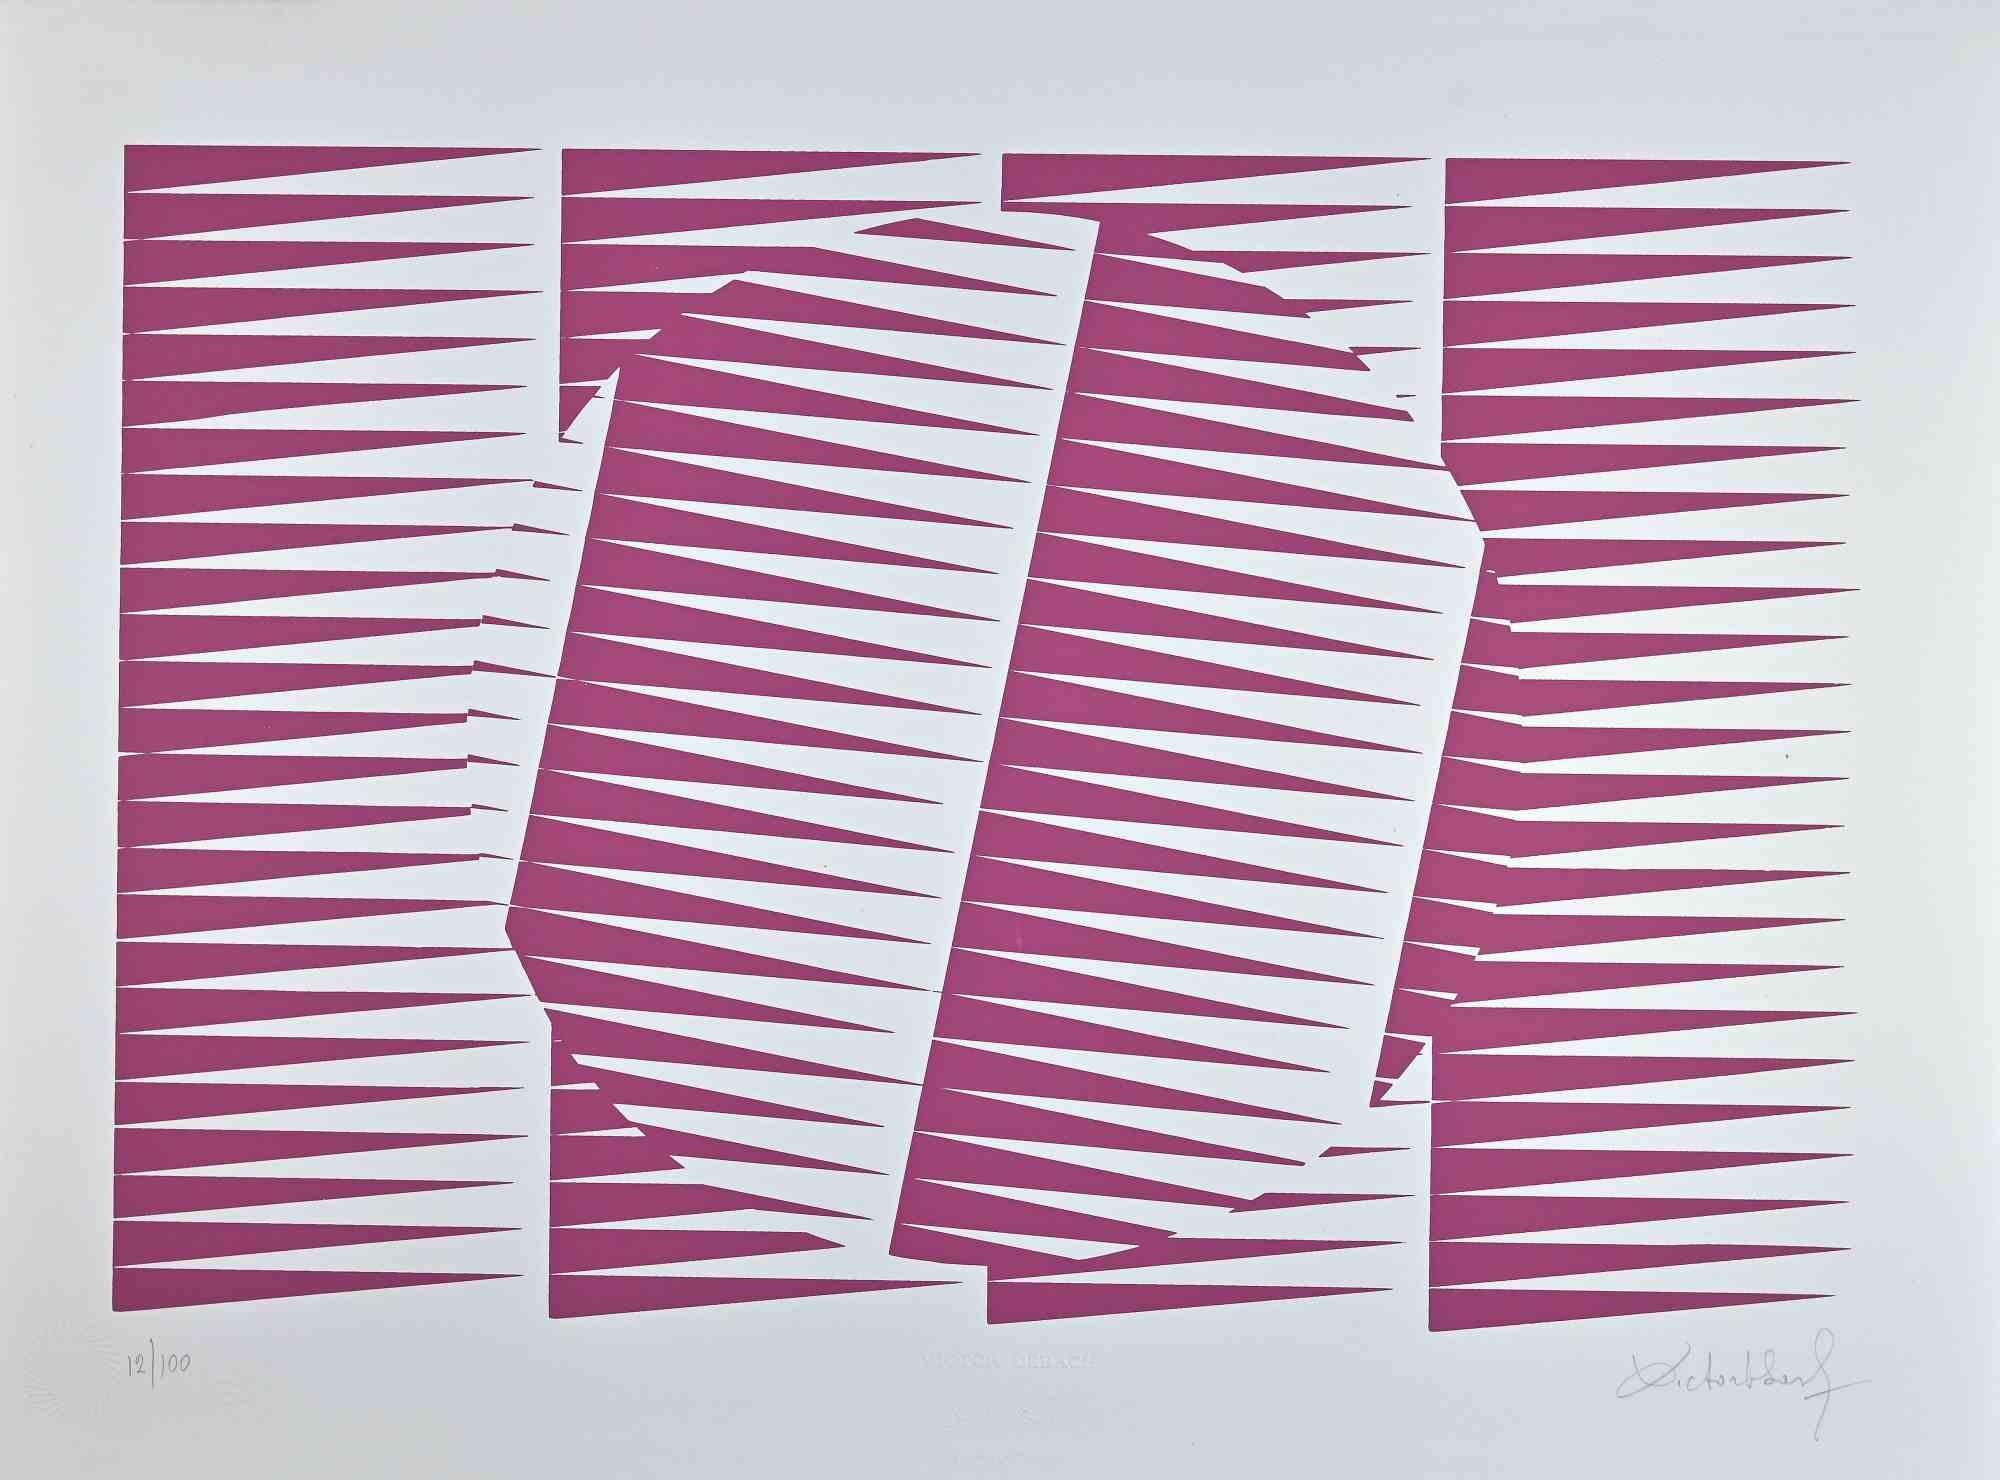 Abstract Pink Composition is a Screen Print on Paper realized by Victor Debach in 1970s.

Limited edition of 100 copies numbered and signed by the artist with pencil on the lower margin.

Very good condition on a white cardboard.